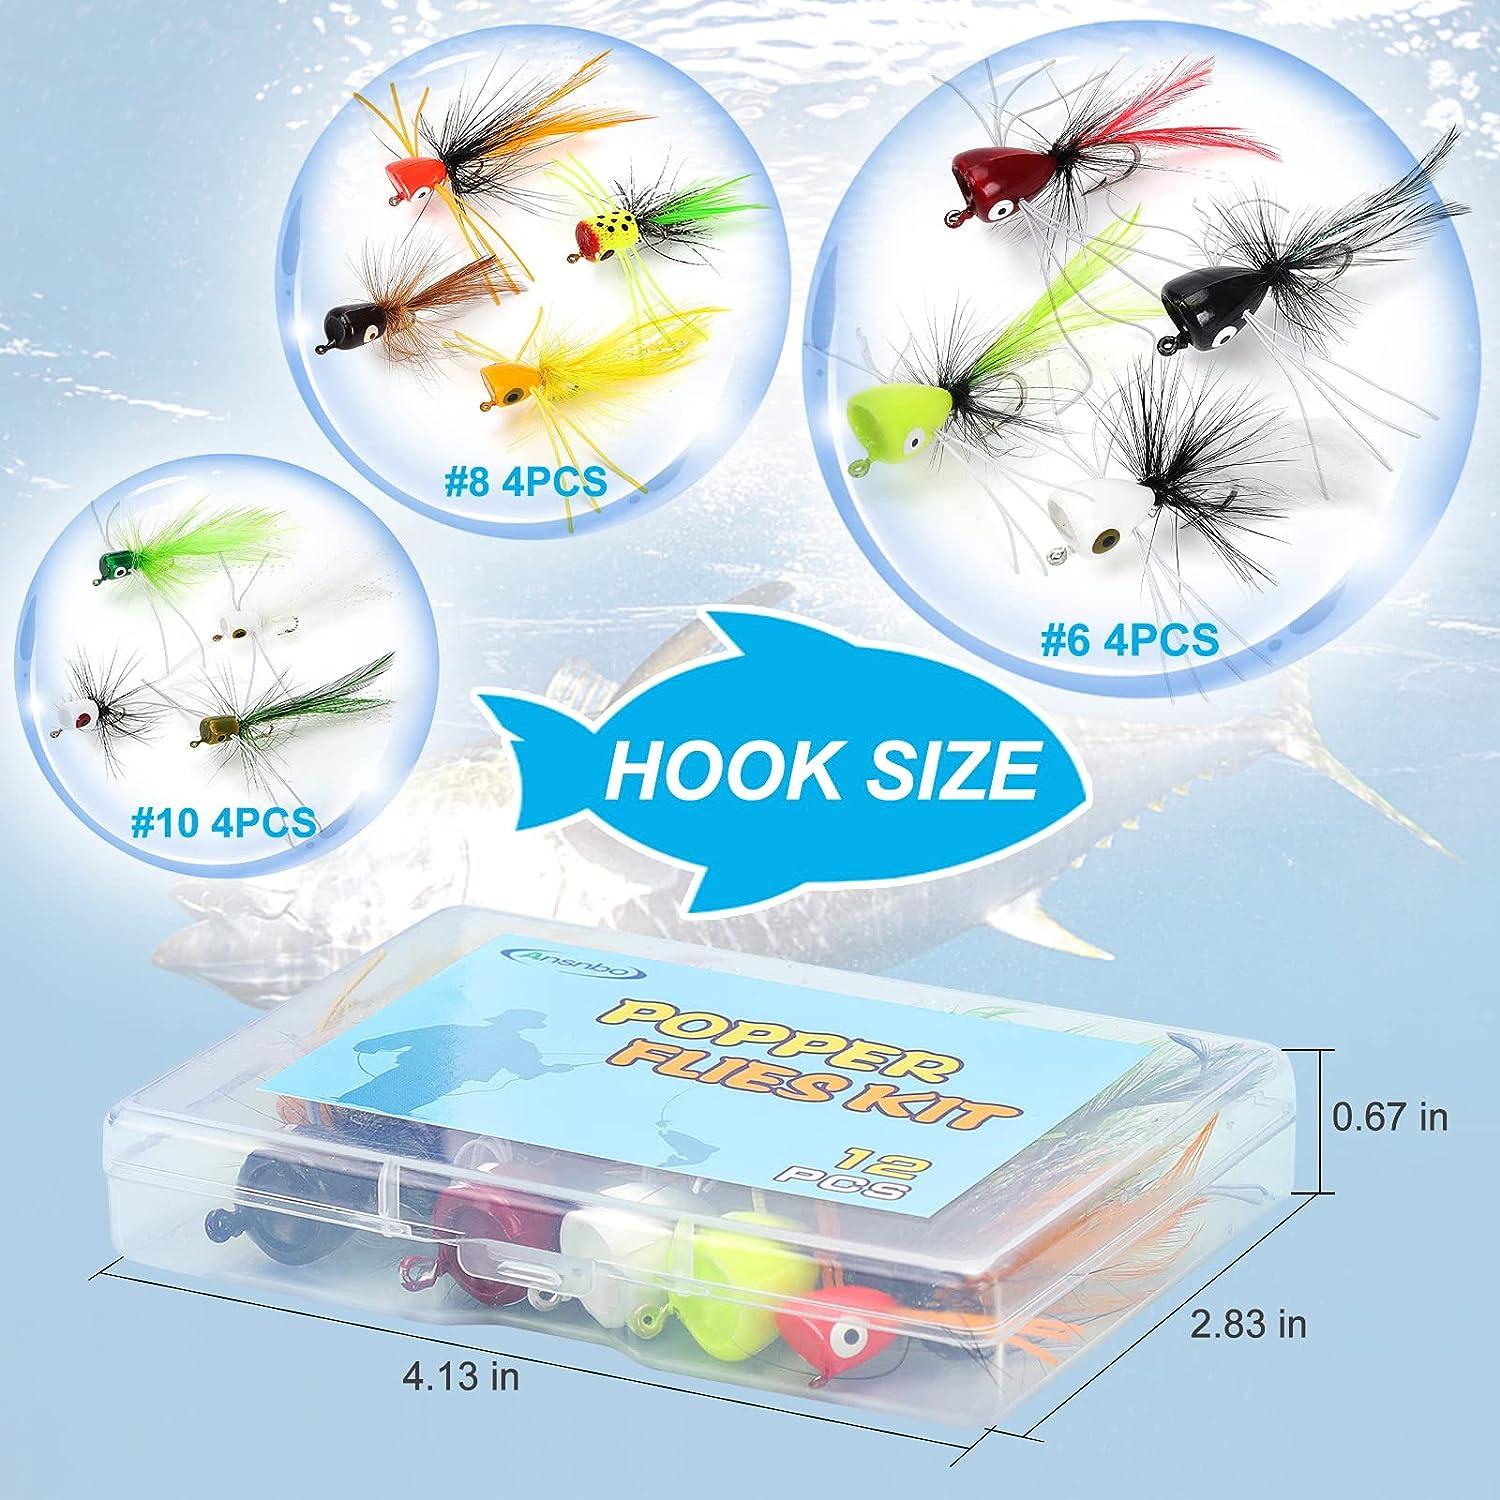 Ansnbo 12PCS Fly Fishing Popper Flies, Fly Popper Lures Bass Panfish  Bluegill Crappie Popping Bug Sunfish Trout Salmon Poppers Flys Kit for Fly  Fishing